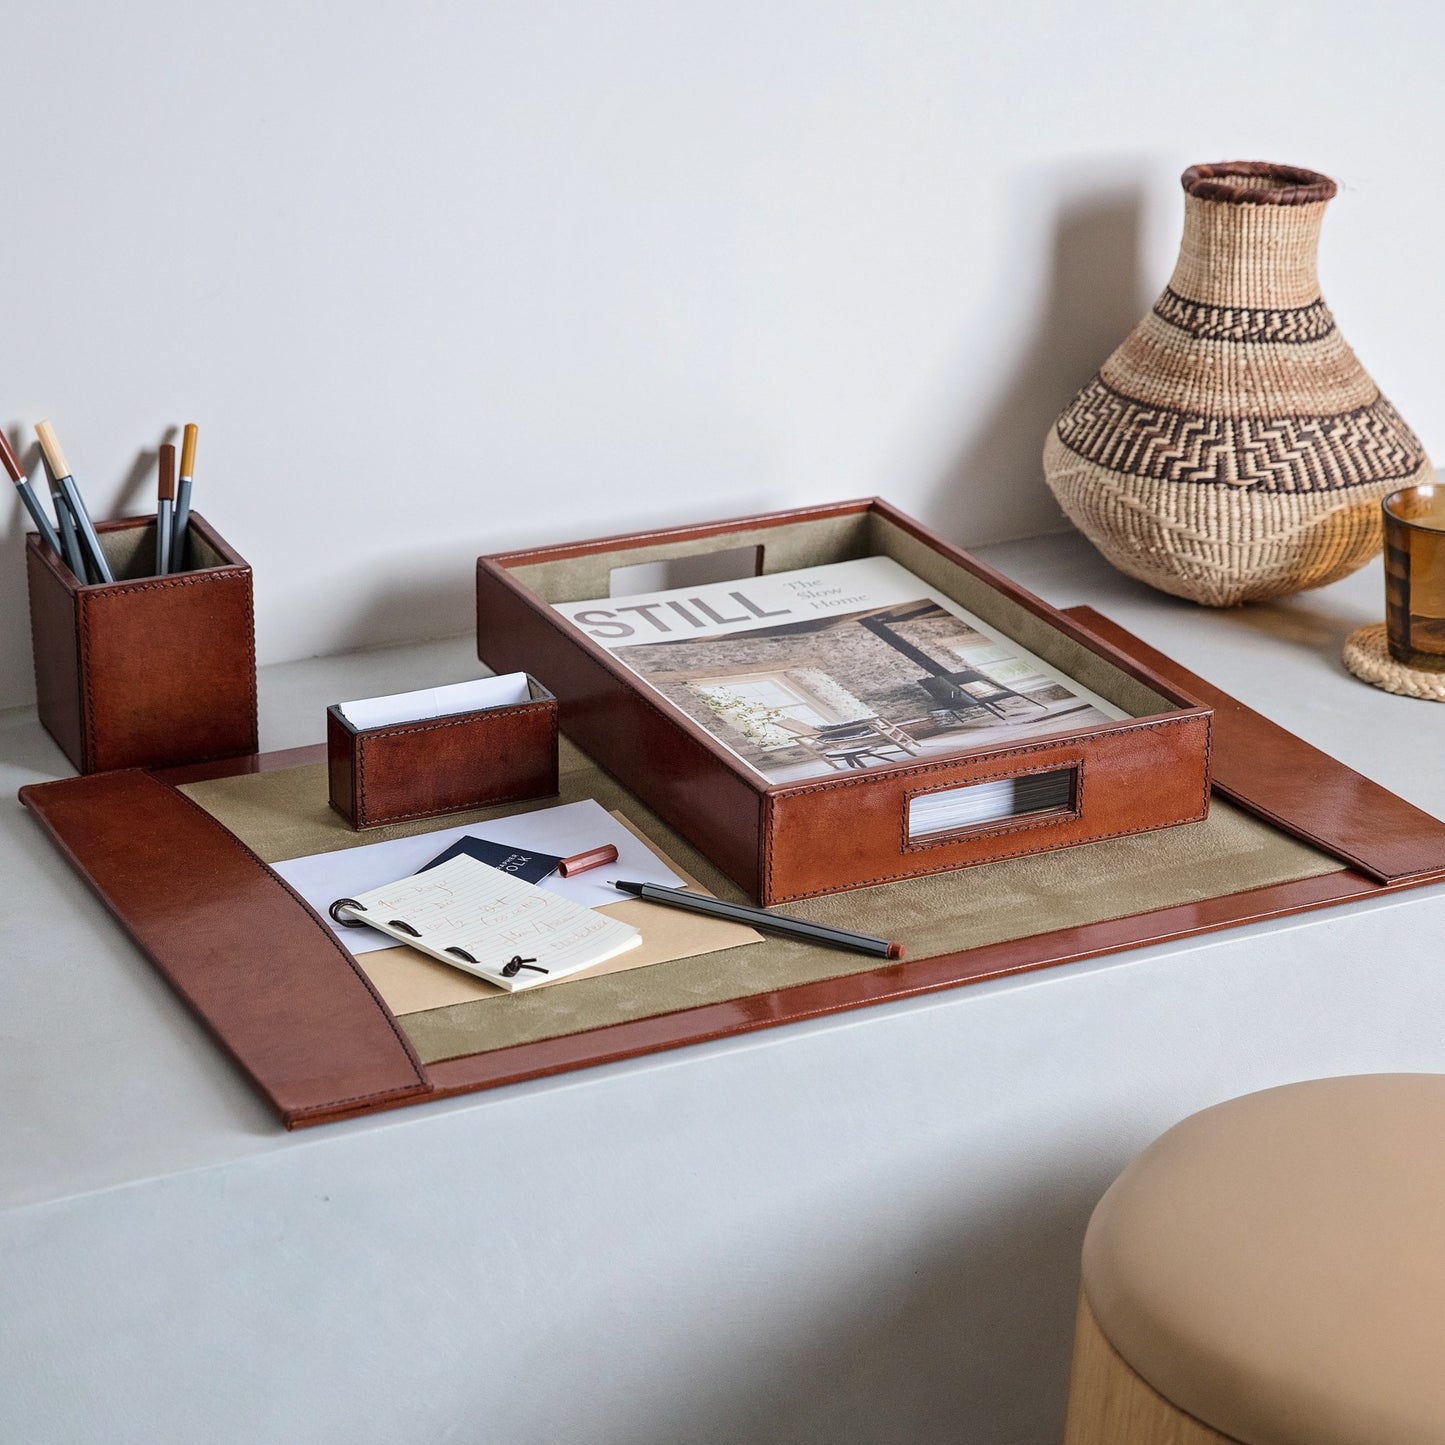 Luxury desk accessories set in tan leather, combining a desk blotter, pen pot, business card holder and A4 leather desk tray. Personalise for a thoughtful and unique gift to celebrate a new job or retirement.